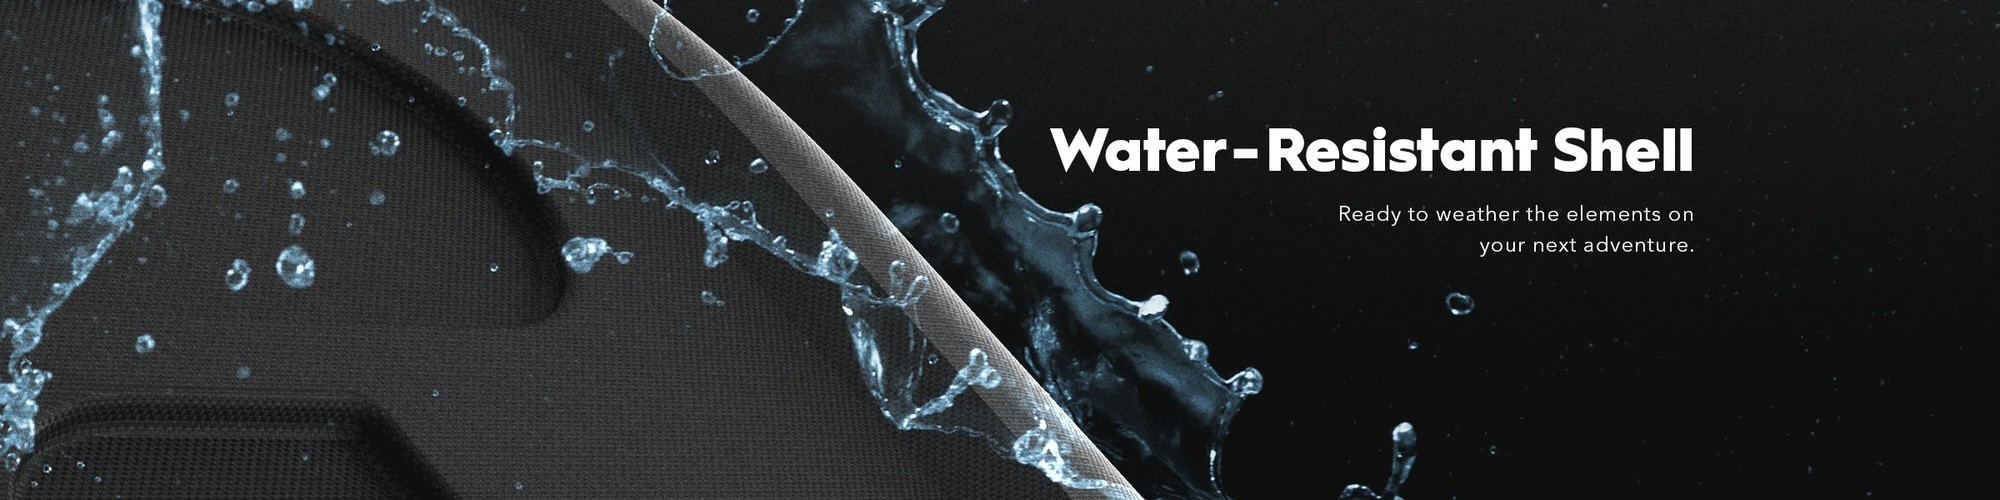 Water-Resistant_Shell_Banner-1516818450186